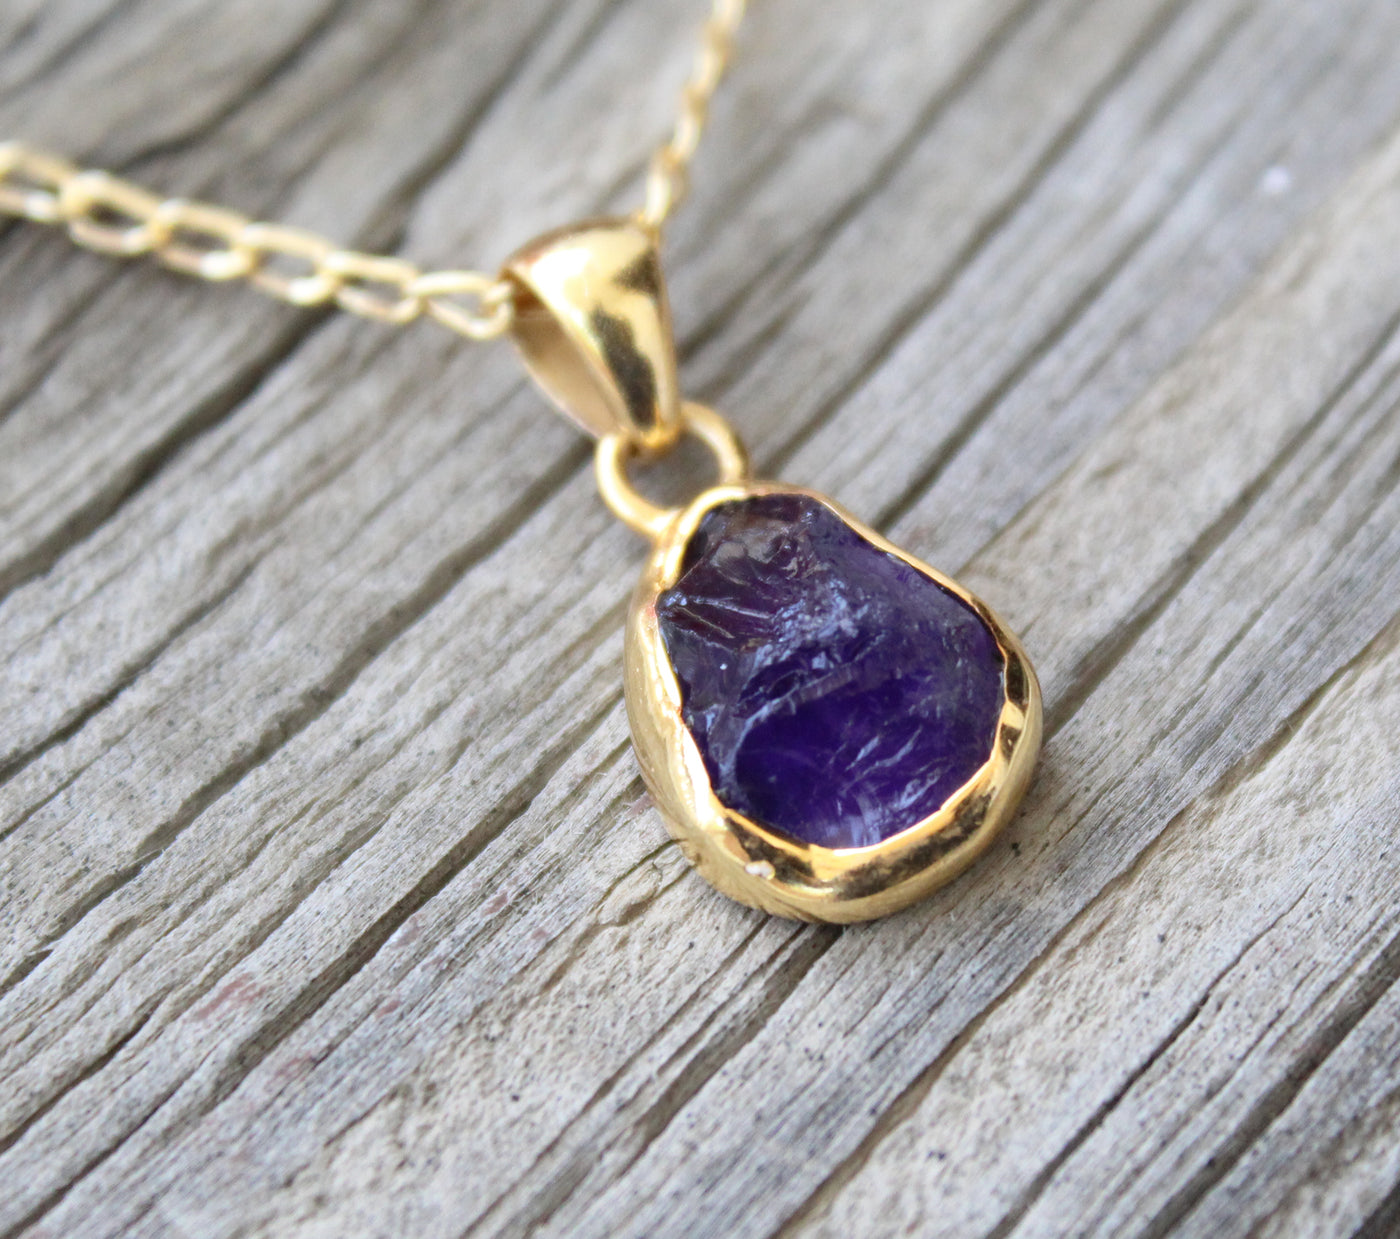 Raw Amethyst Necklace, Crystal Necklace, Bridesmaid Necklace, Gold Filled Raw Necklace, Sterling Silver Necklace, Purple Stone Necklace